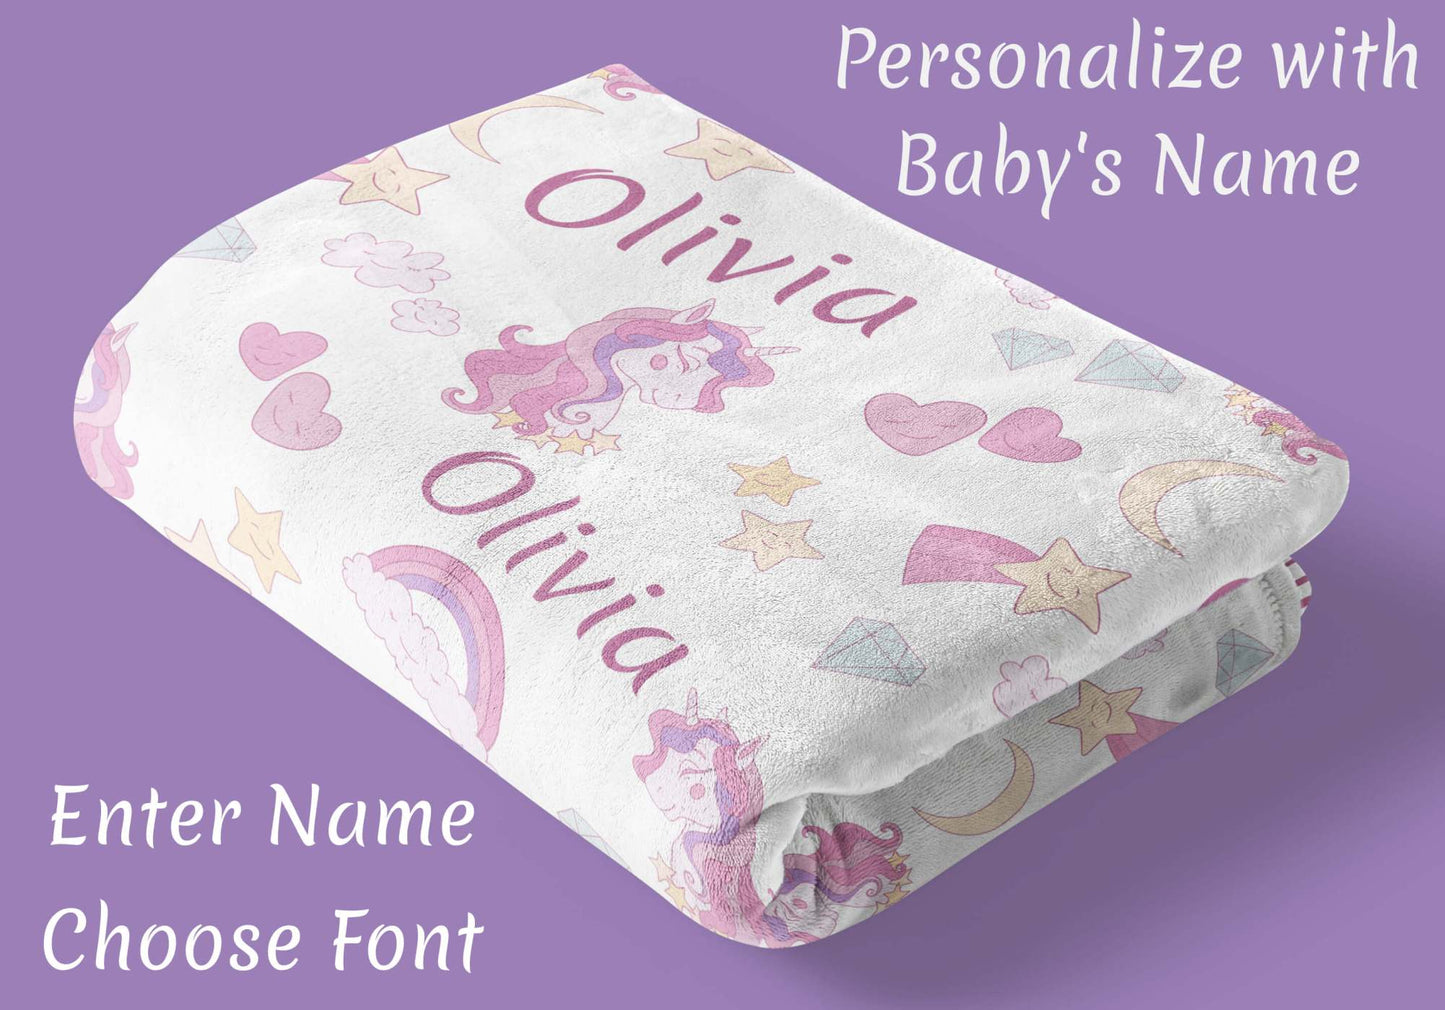 Personalized Baby Blankets for Girls with Name, Unicorns and Rainbows